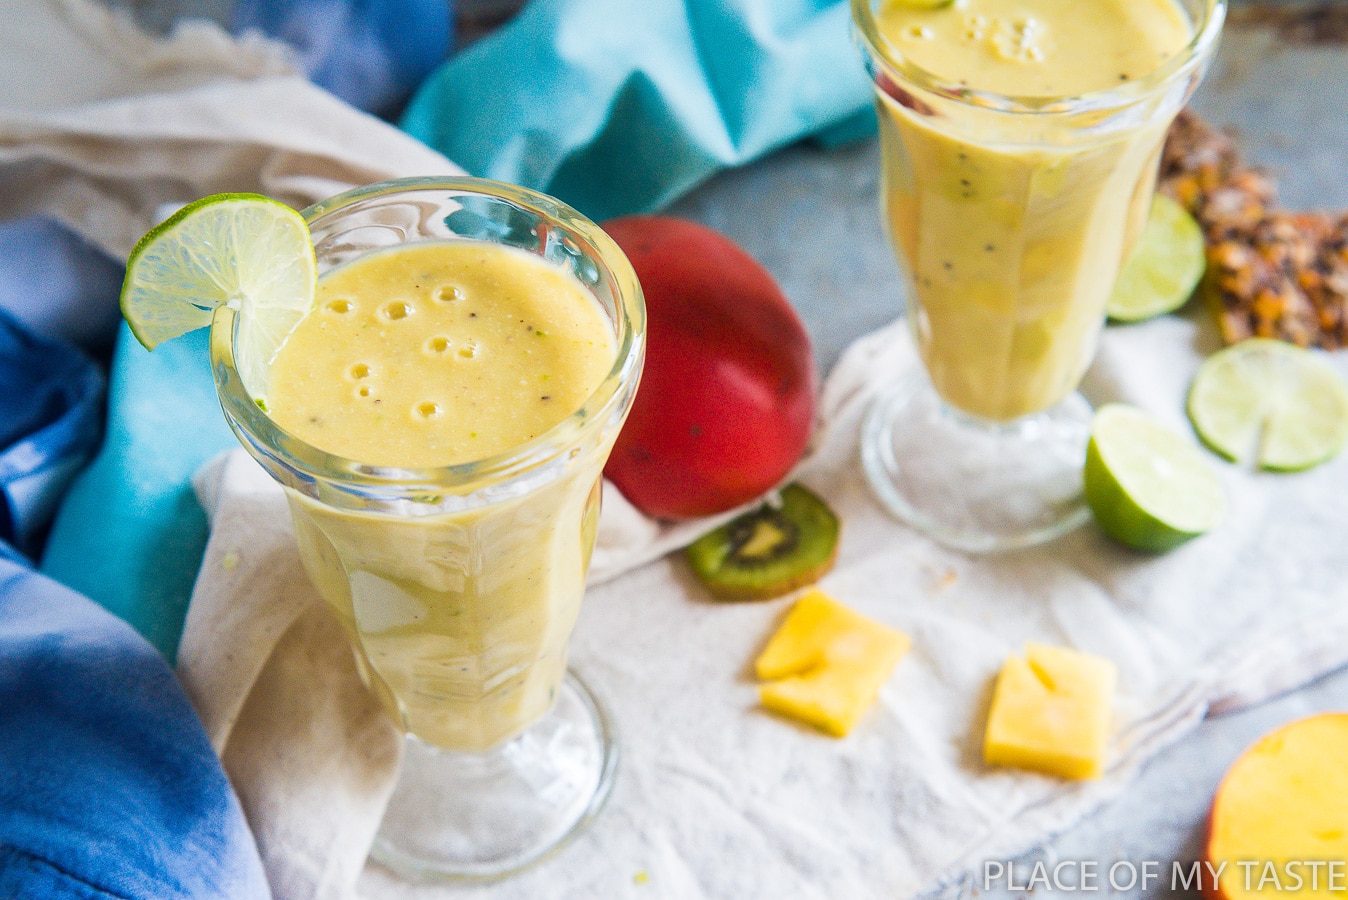 Fresh mango smoothie - so easy to make and healthy too!